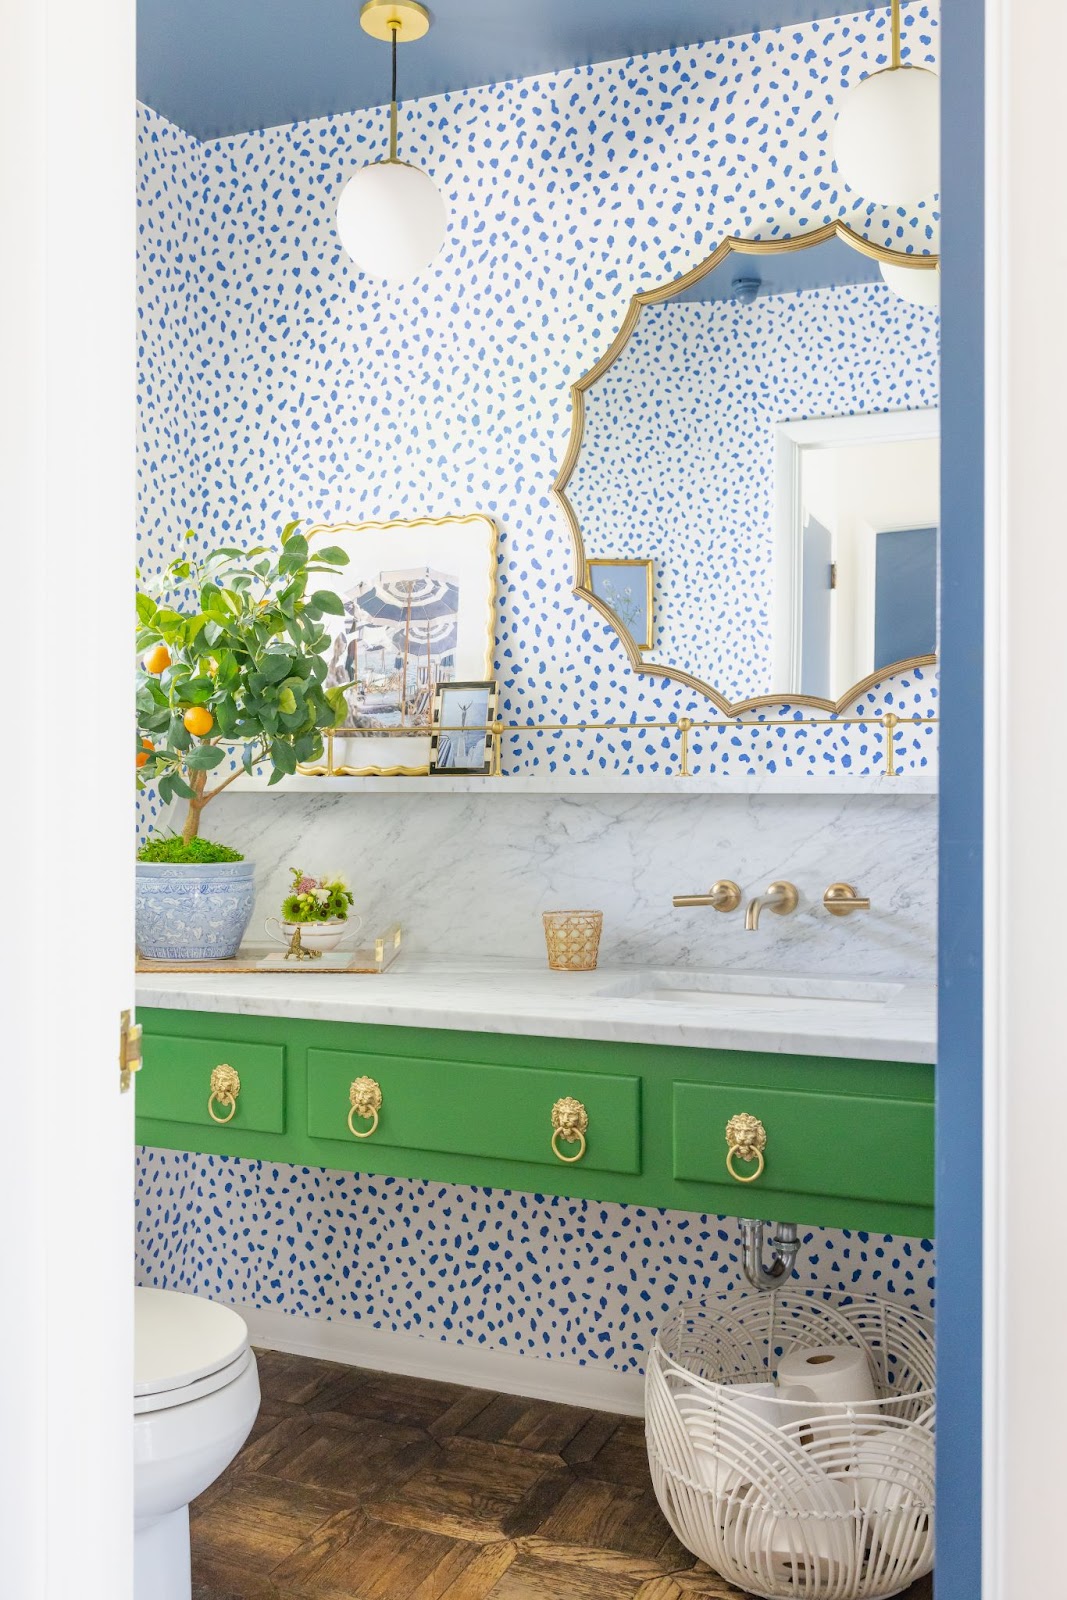 A colorful bathroom features a boldly painted green vanity cabinet, blue and white print wallpaper with touches of gold and polished brass as accent pieces